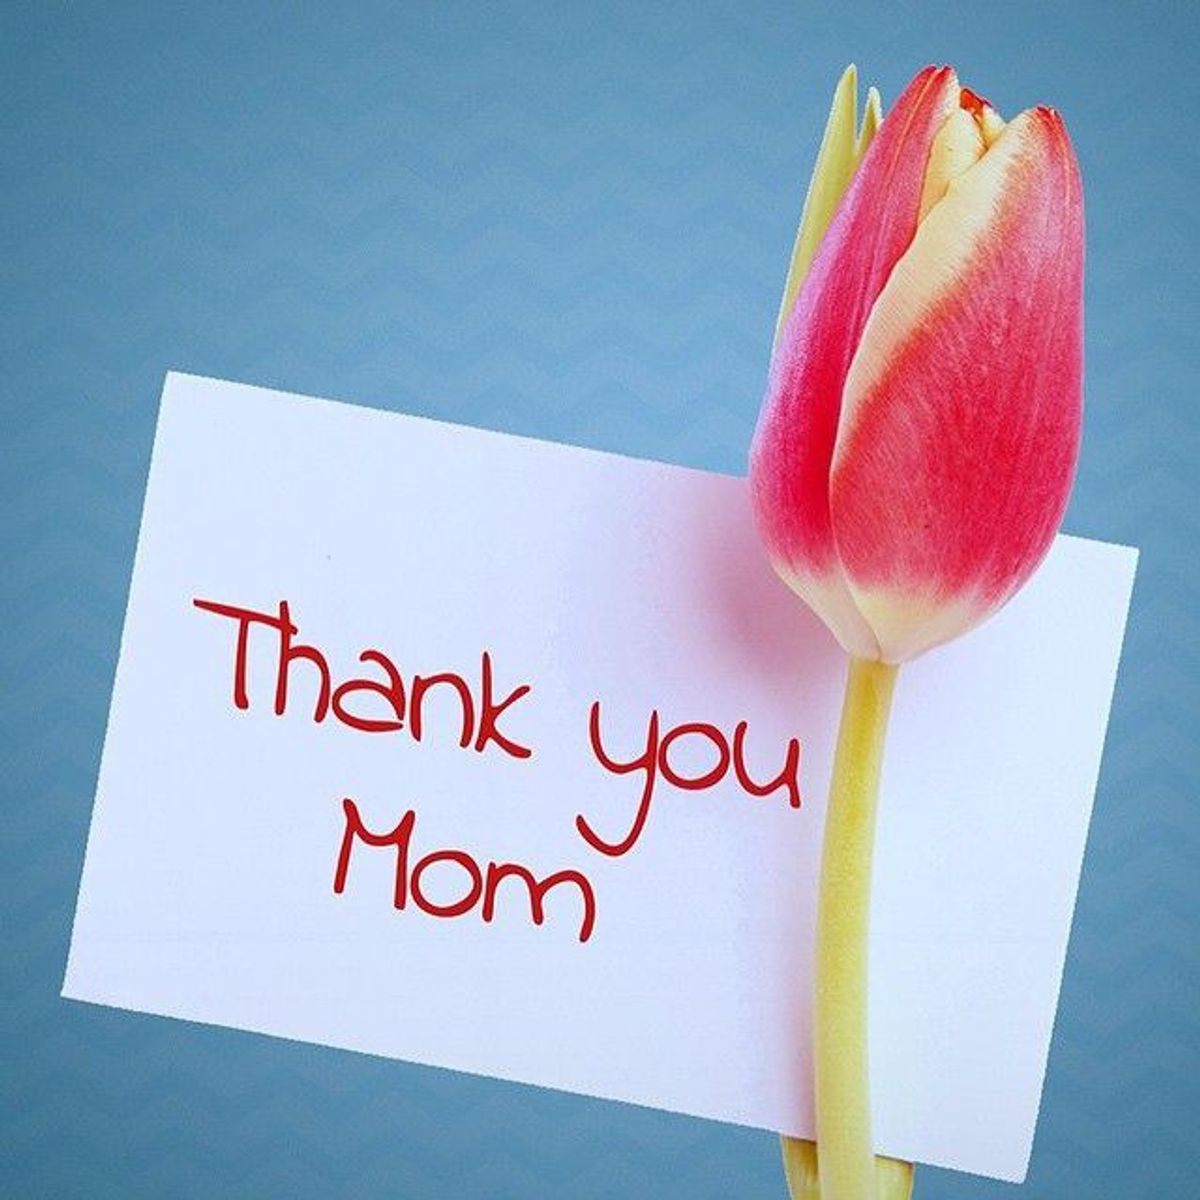 10 things to thank your mom for